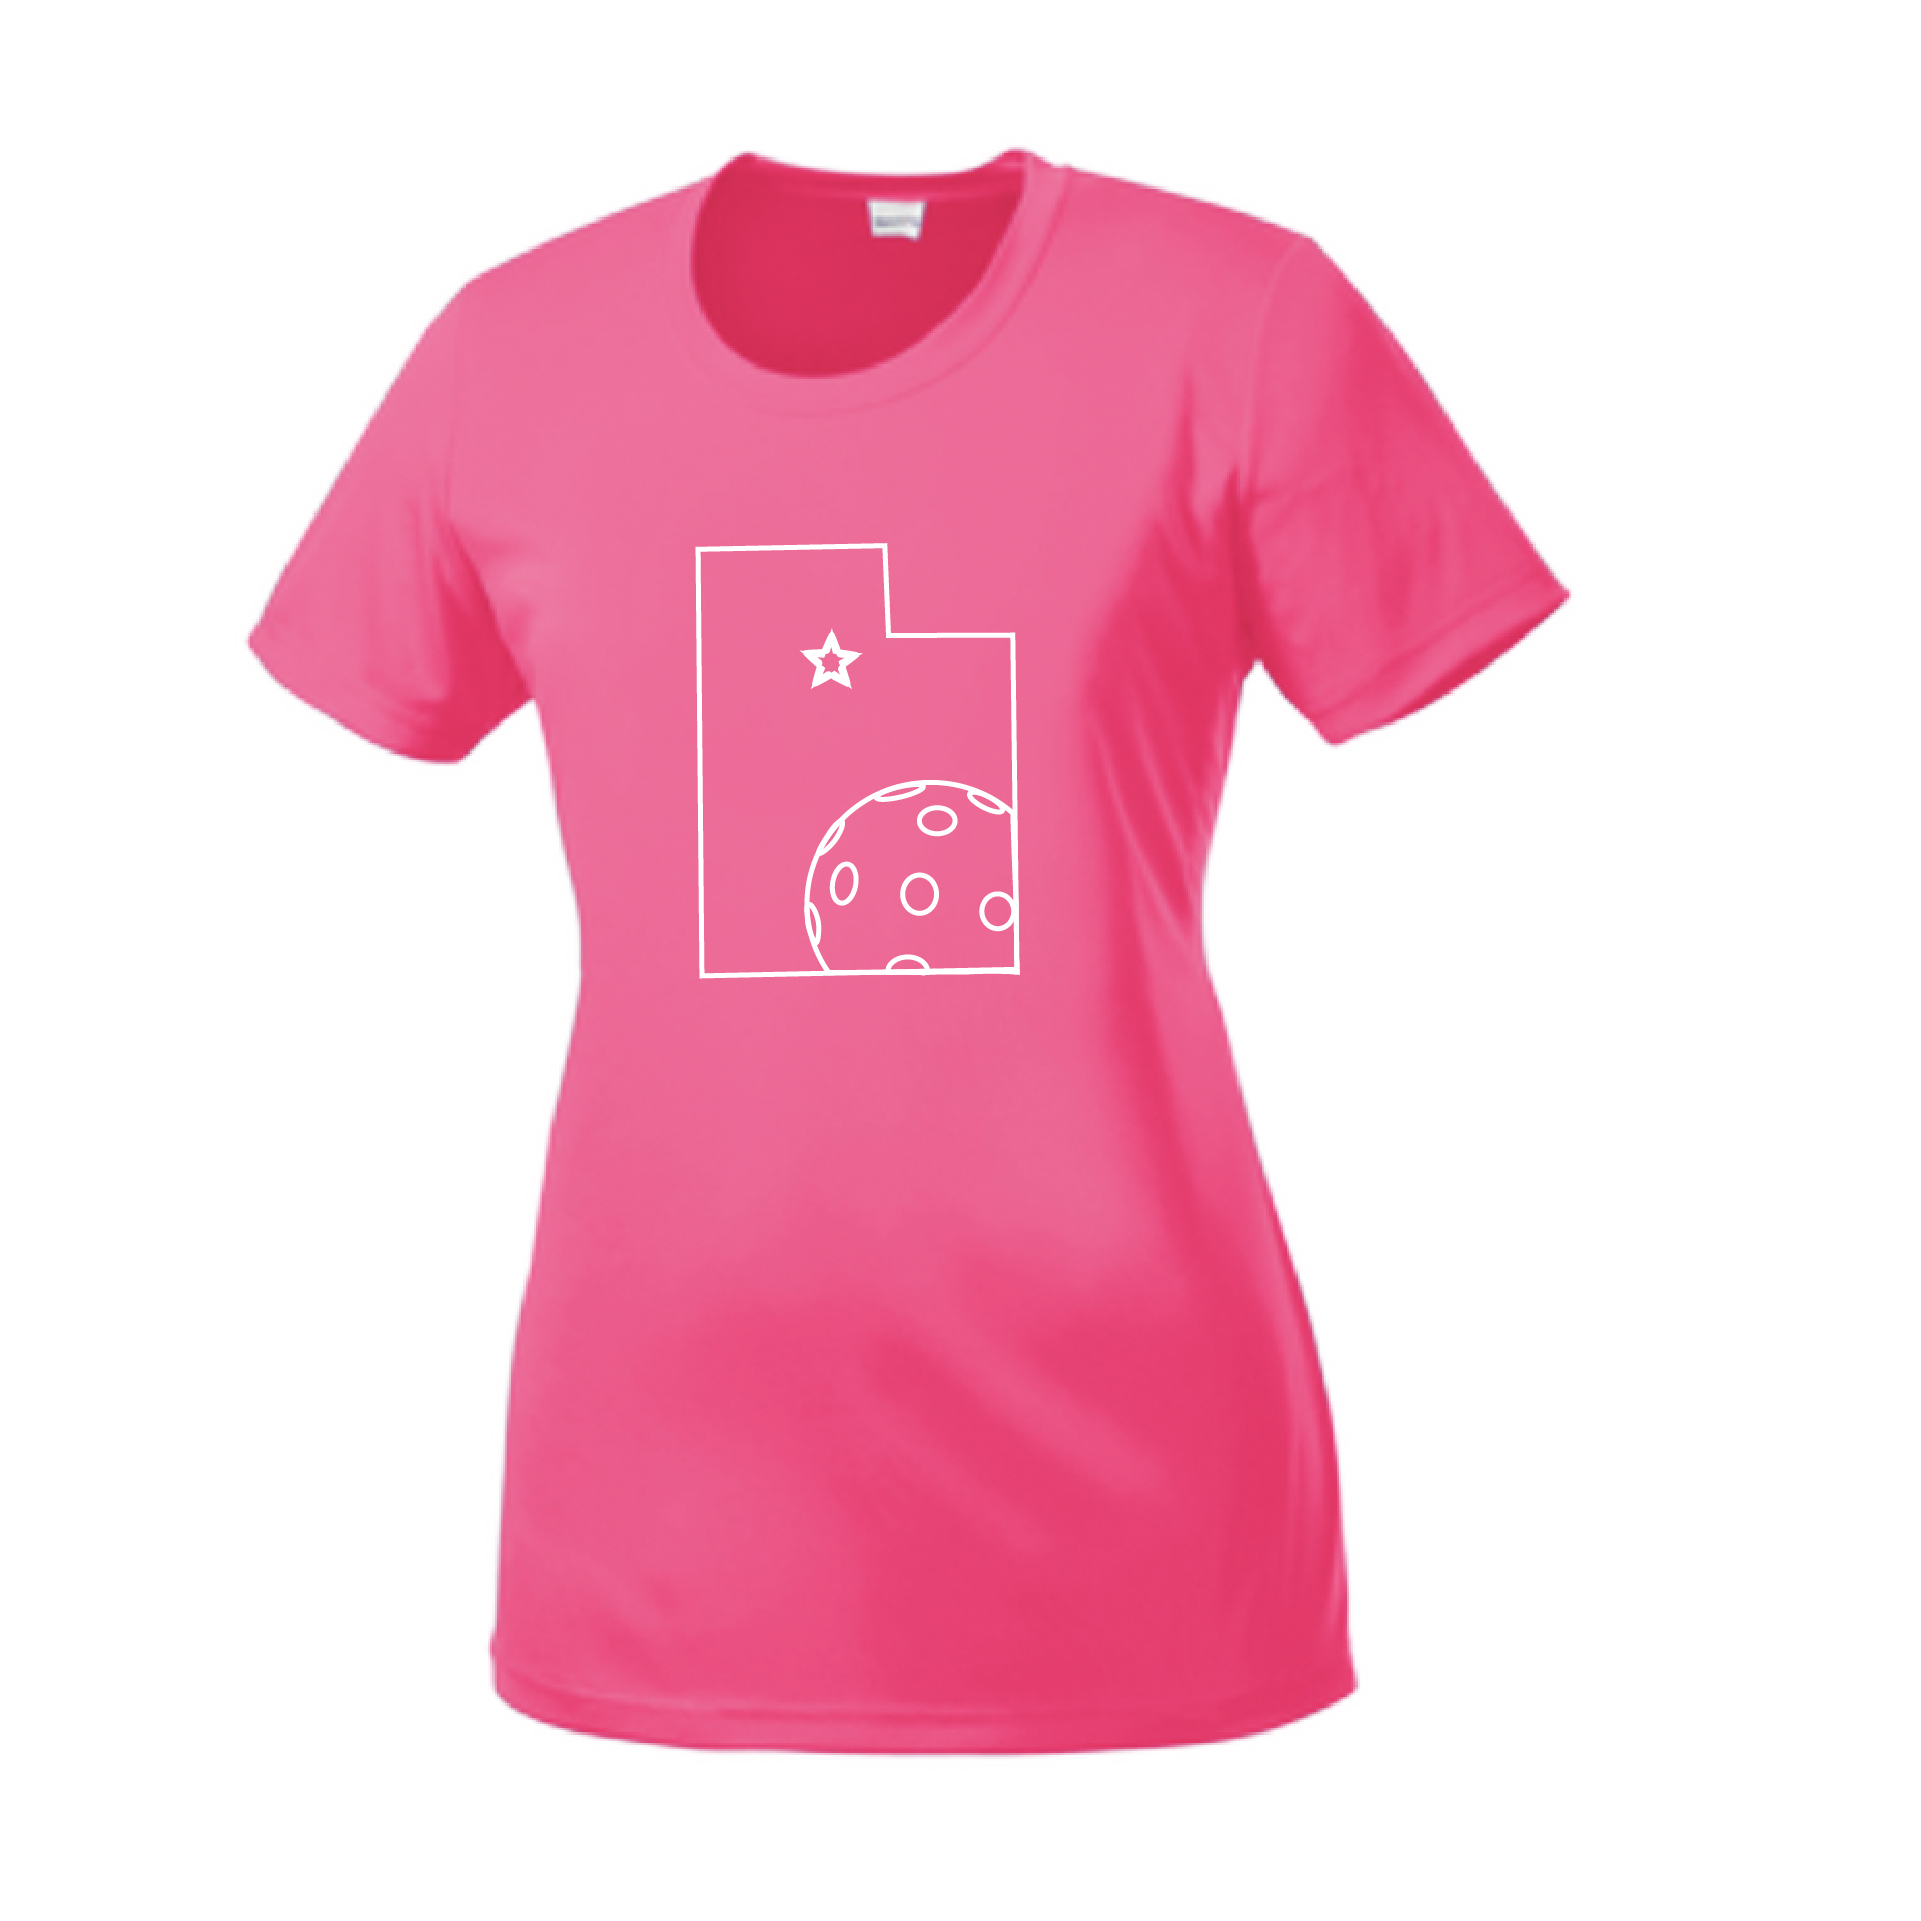 Pickleball Design: Utah Pickleball.   Women's Styles: Short-Sleeve Crew-Neck  Turn up the volume in this Women's shirt with its perfect mix of softness and attitude. Material is ultra-comfortable with moisture wicking properties and tri-blend softness. PosiCharge technology locks in color. Highly breathable and lightweight.